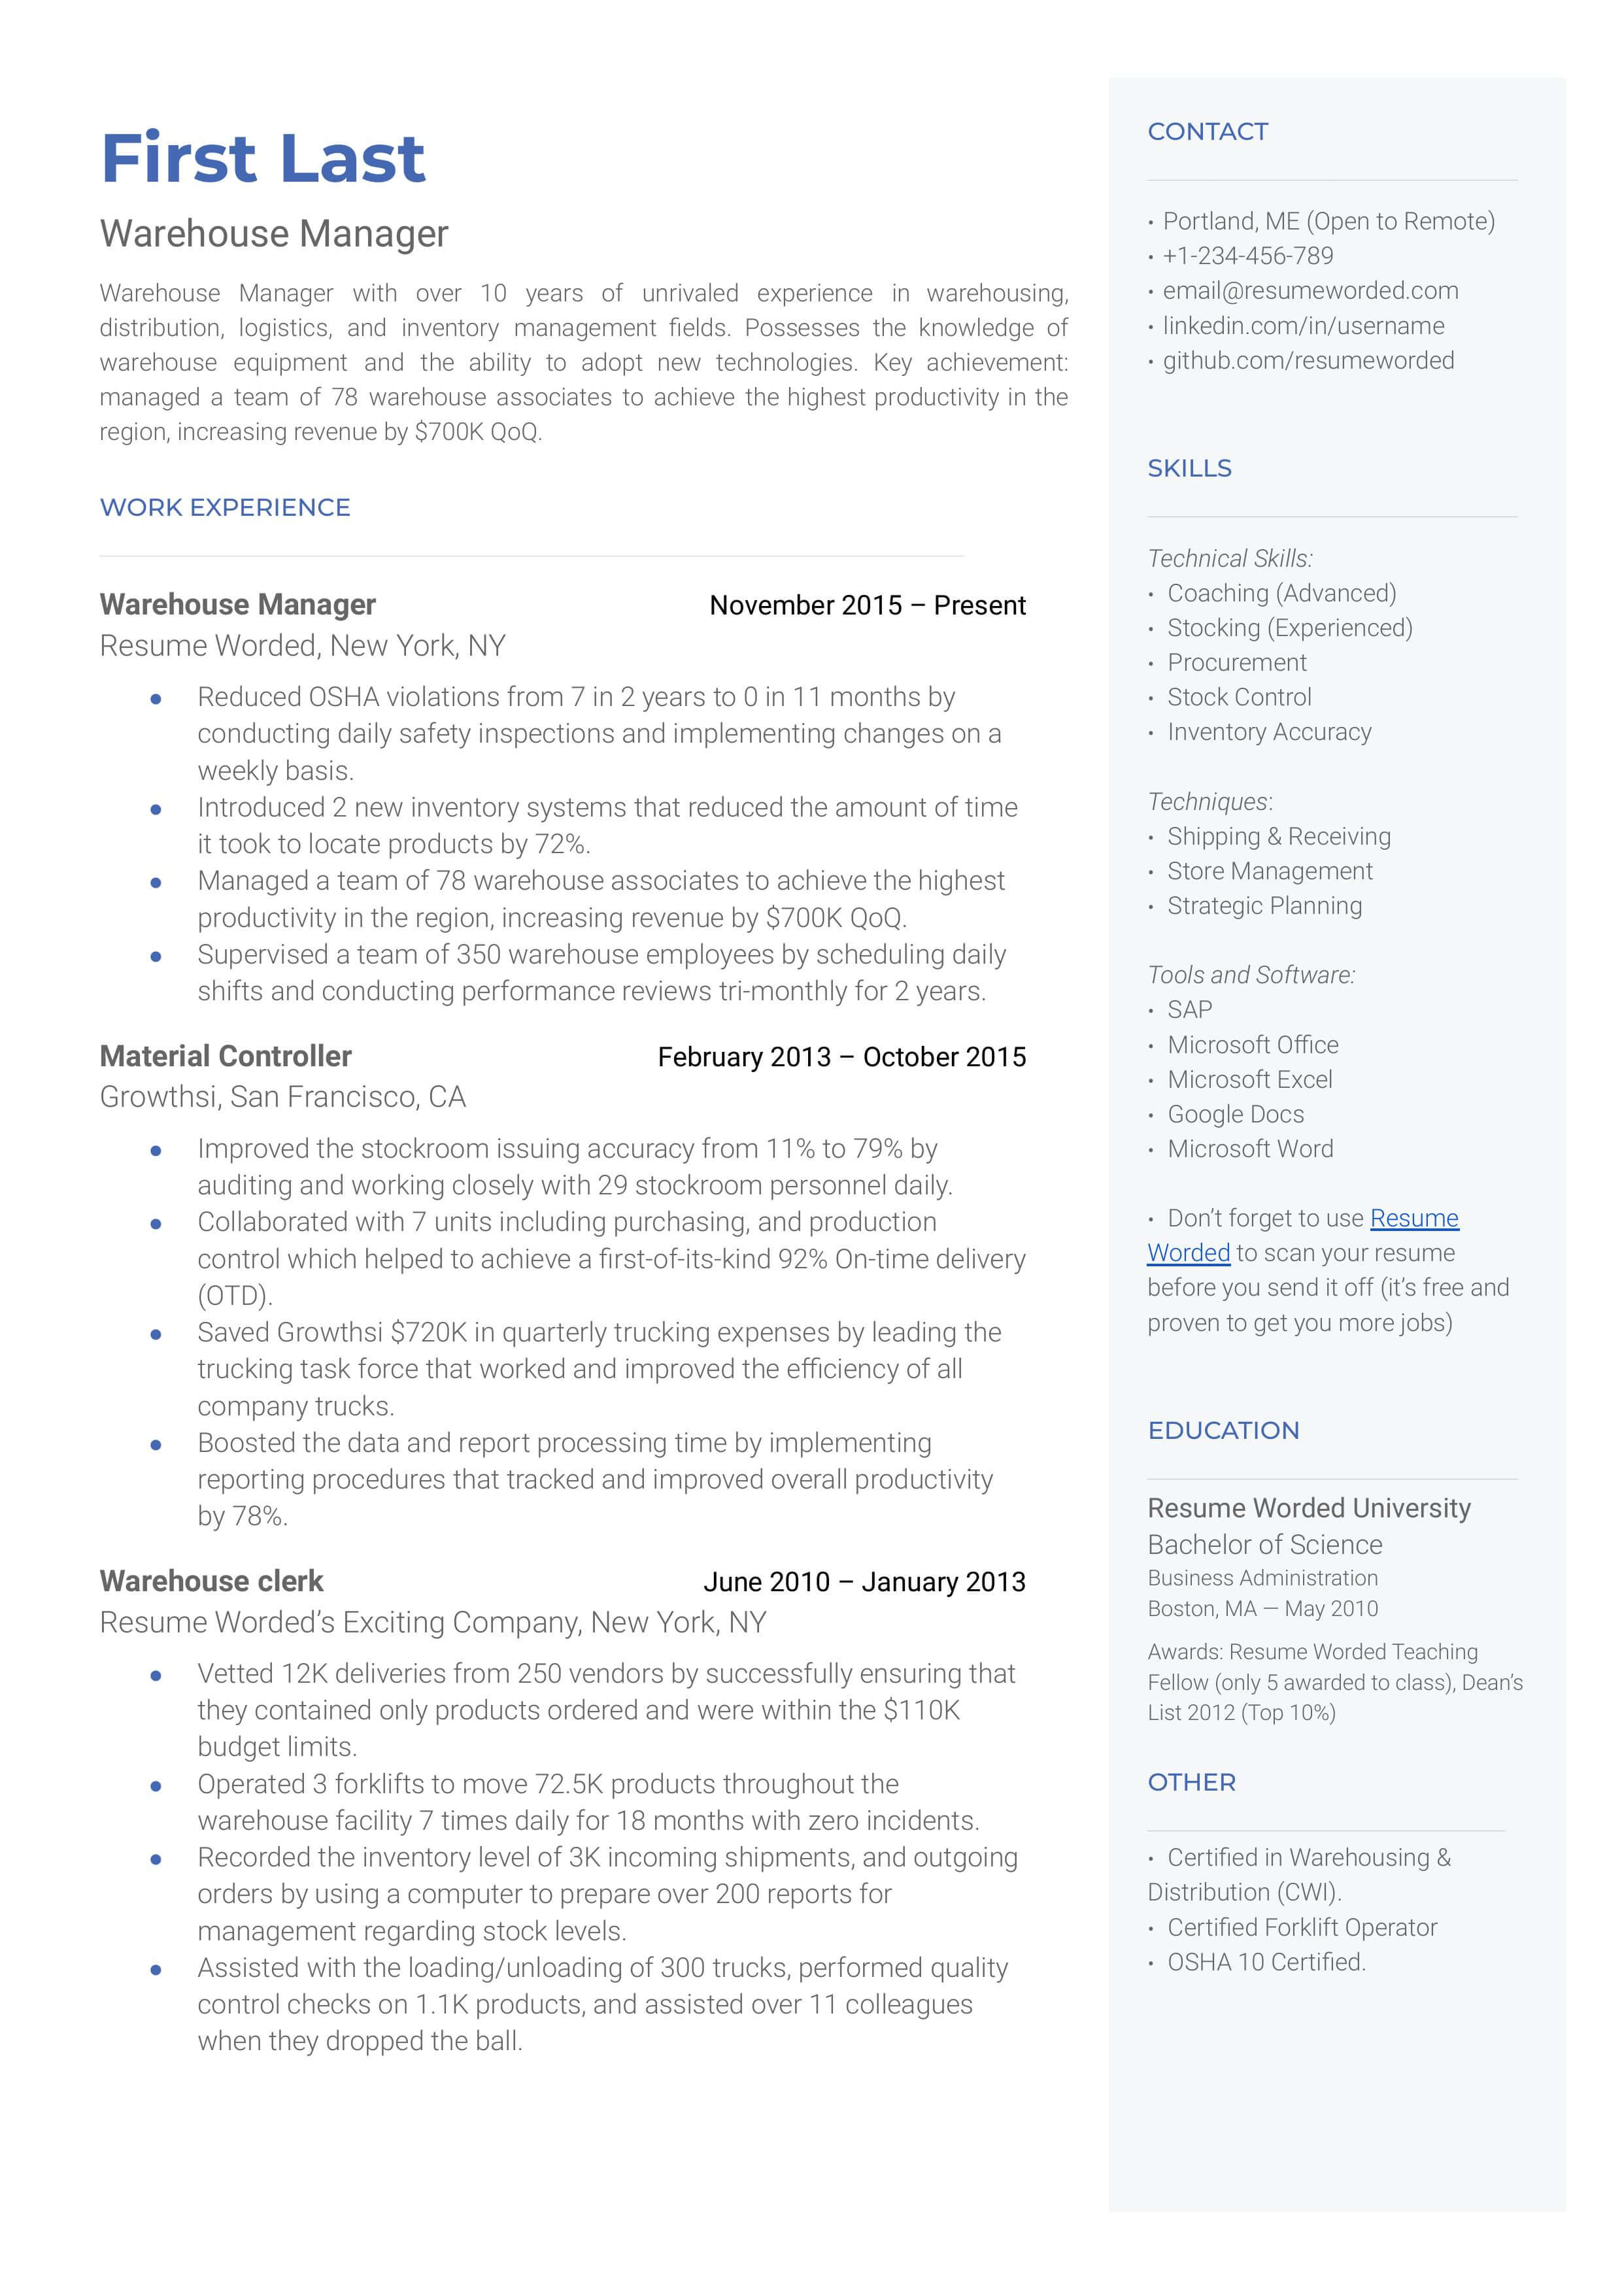 A detailed CV showcasing the skills and experiences of a Warehouse Manager.